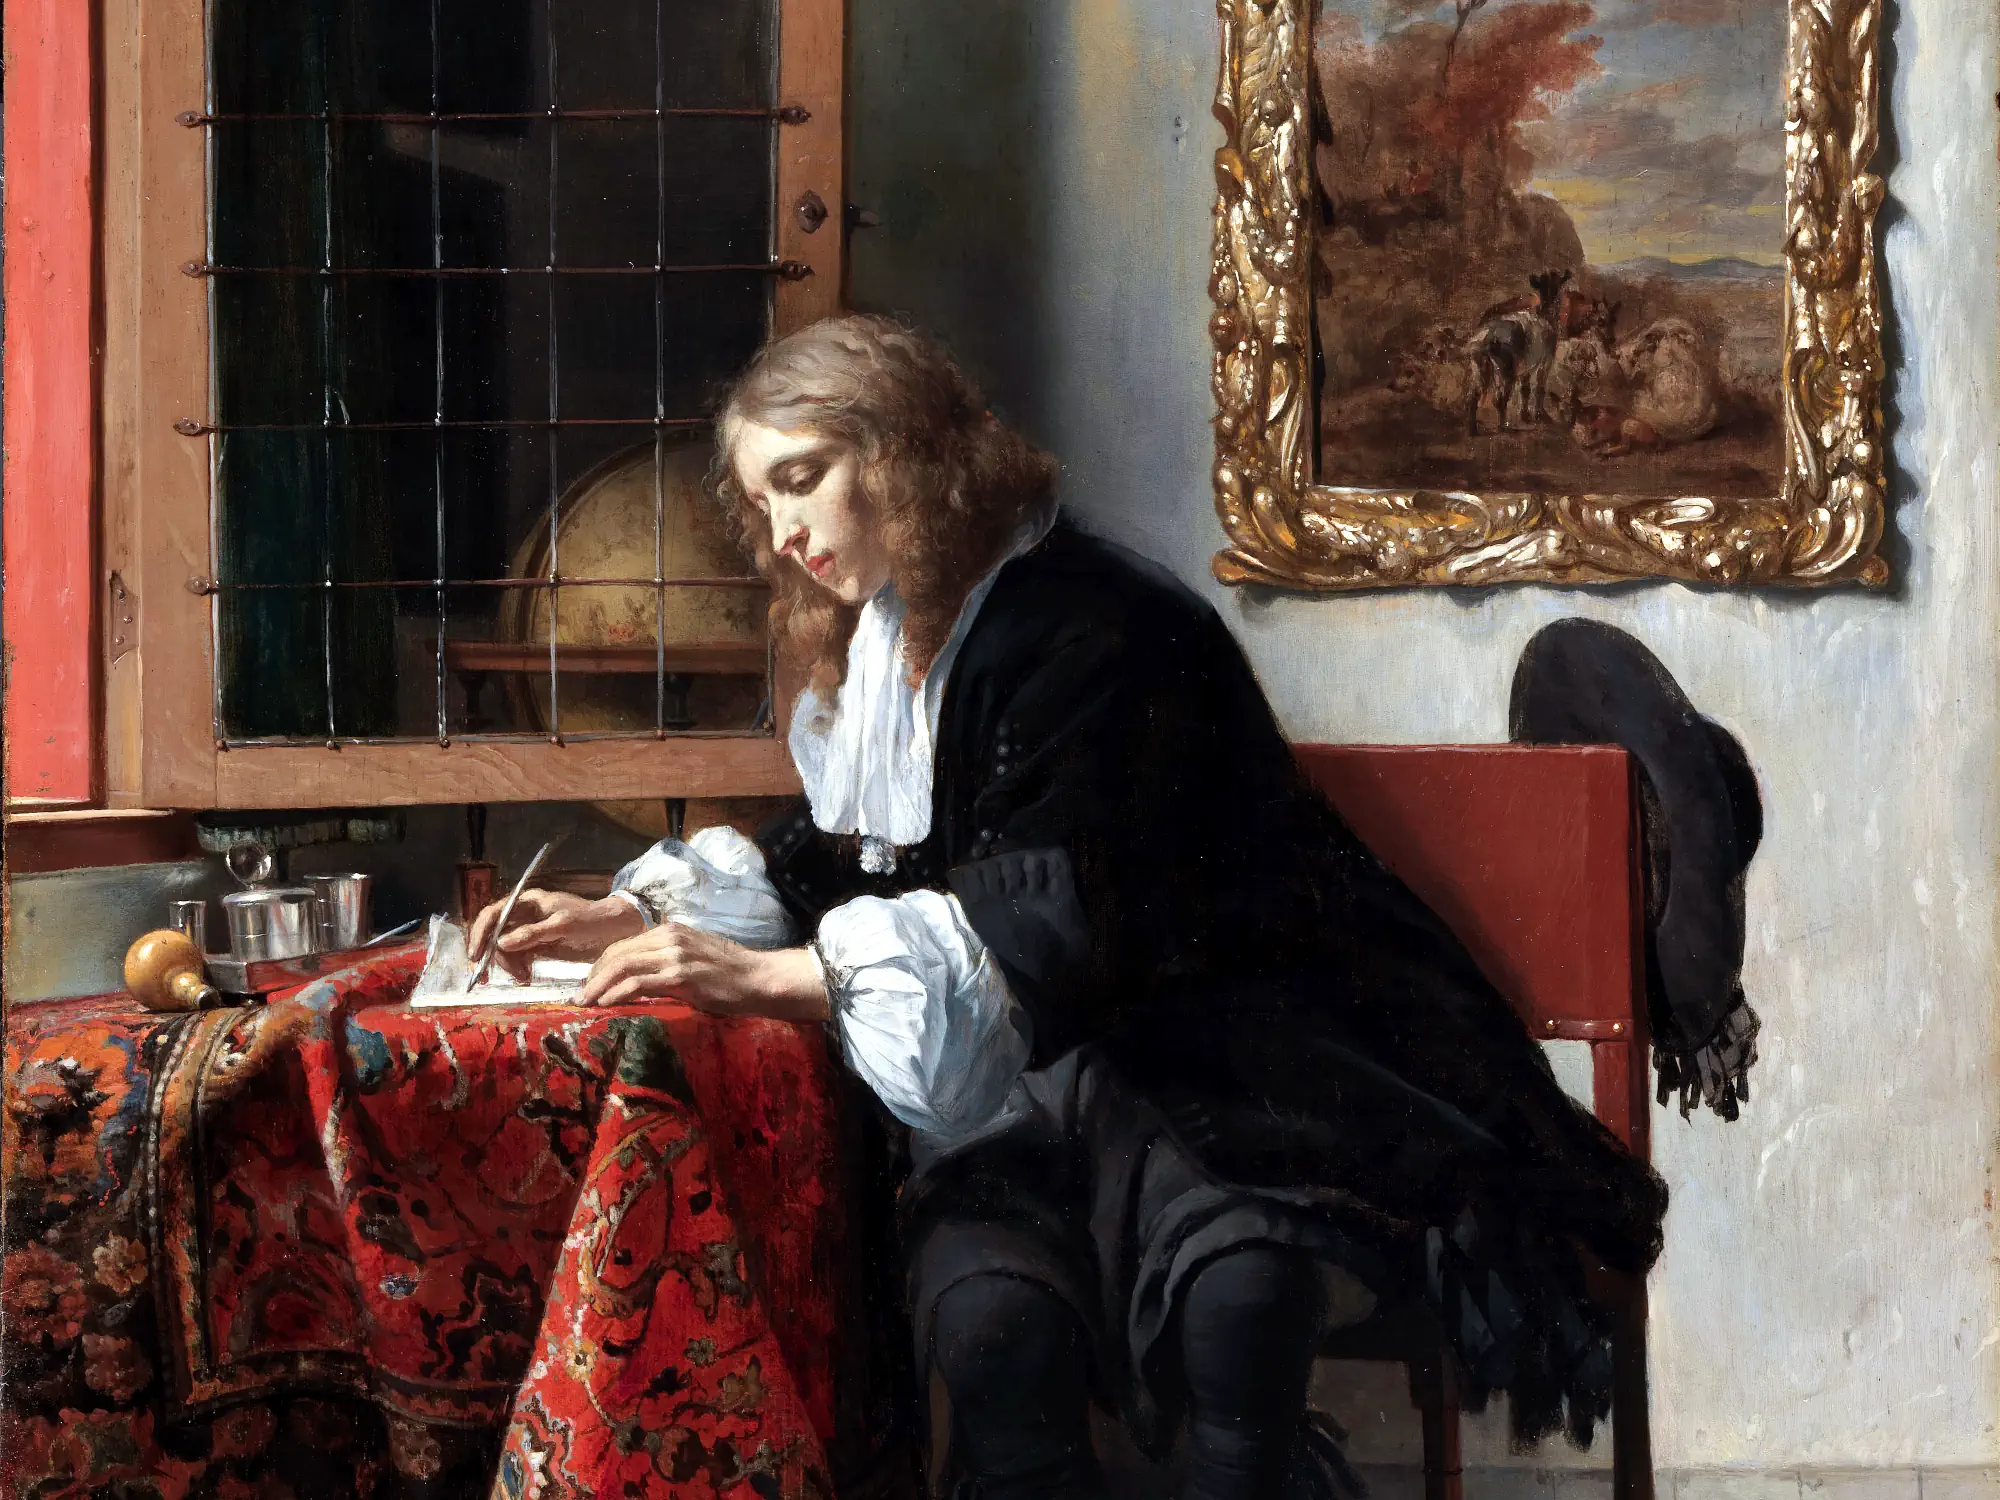 Oil painting of a man writing a letter using a quill.